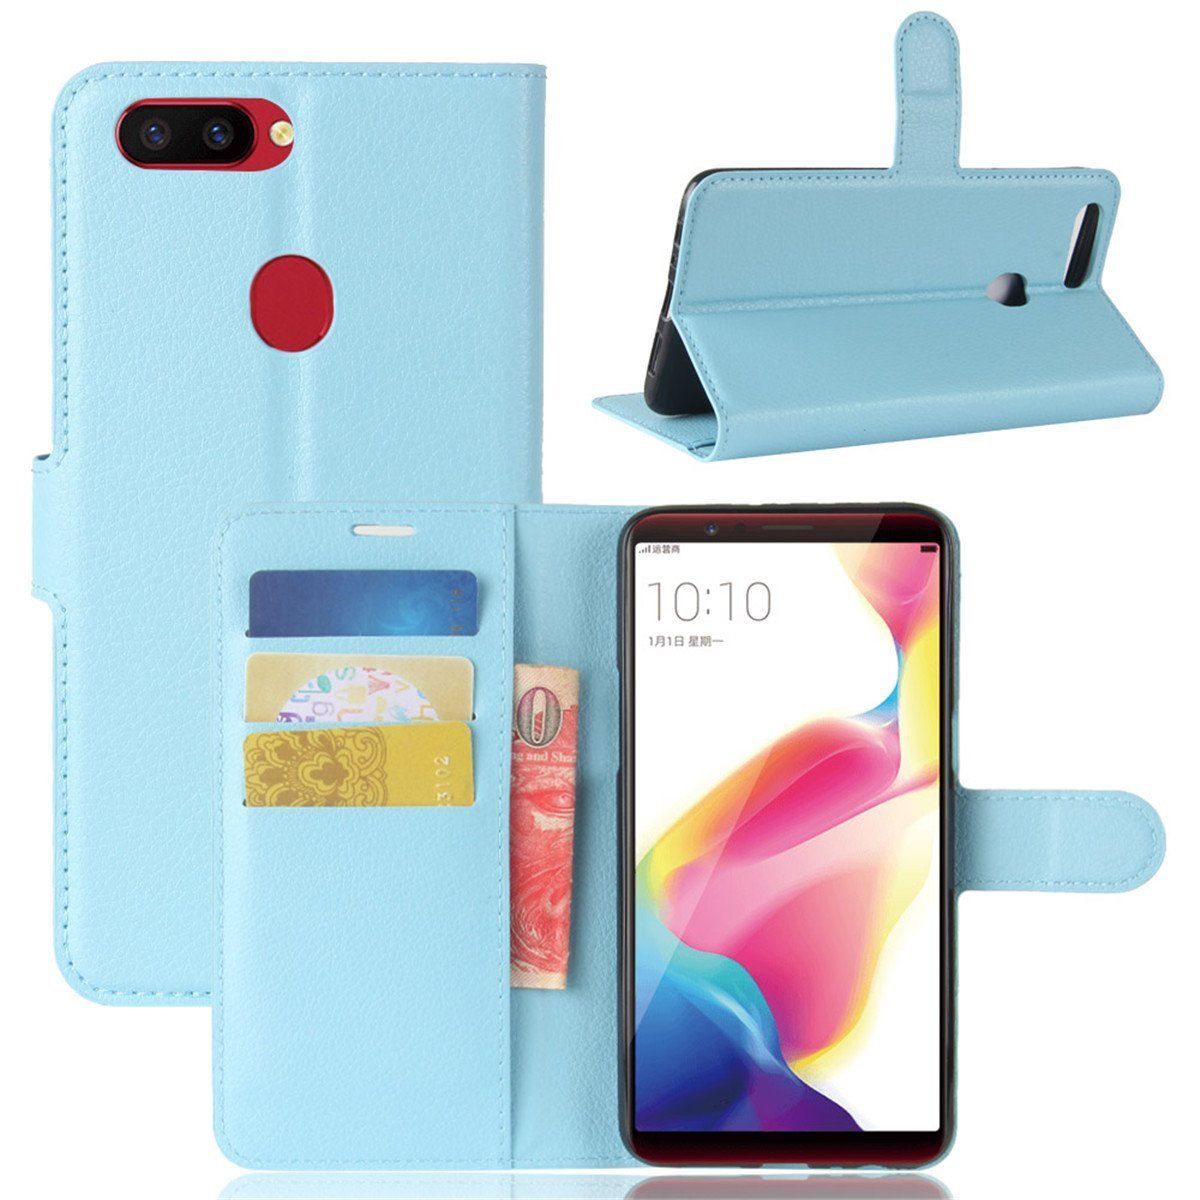 Oppo AX7 Premium Leather Wallet Case Cover For Oppo Case-Sky Blue